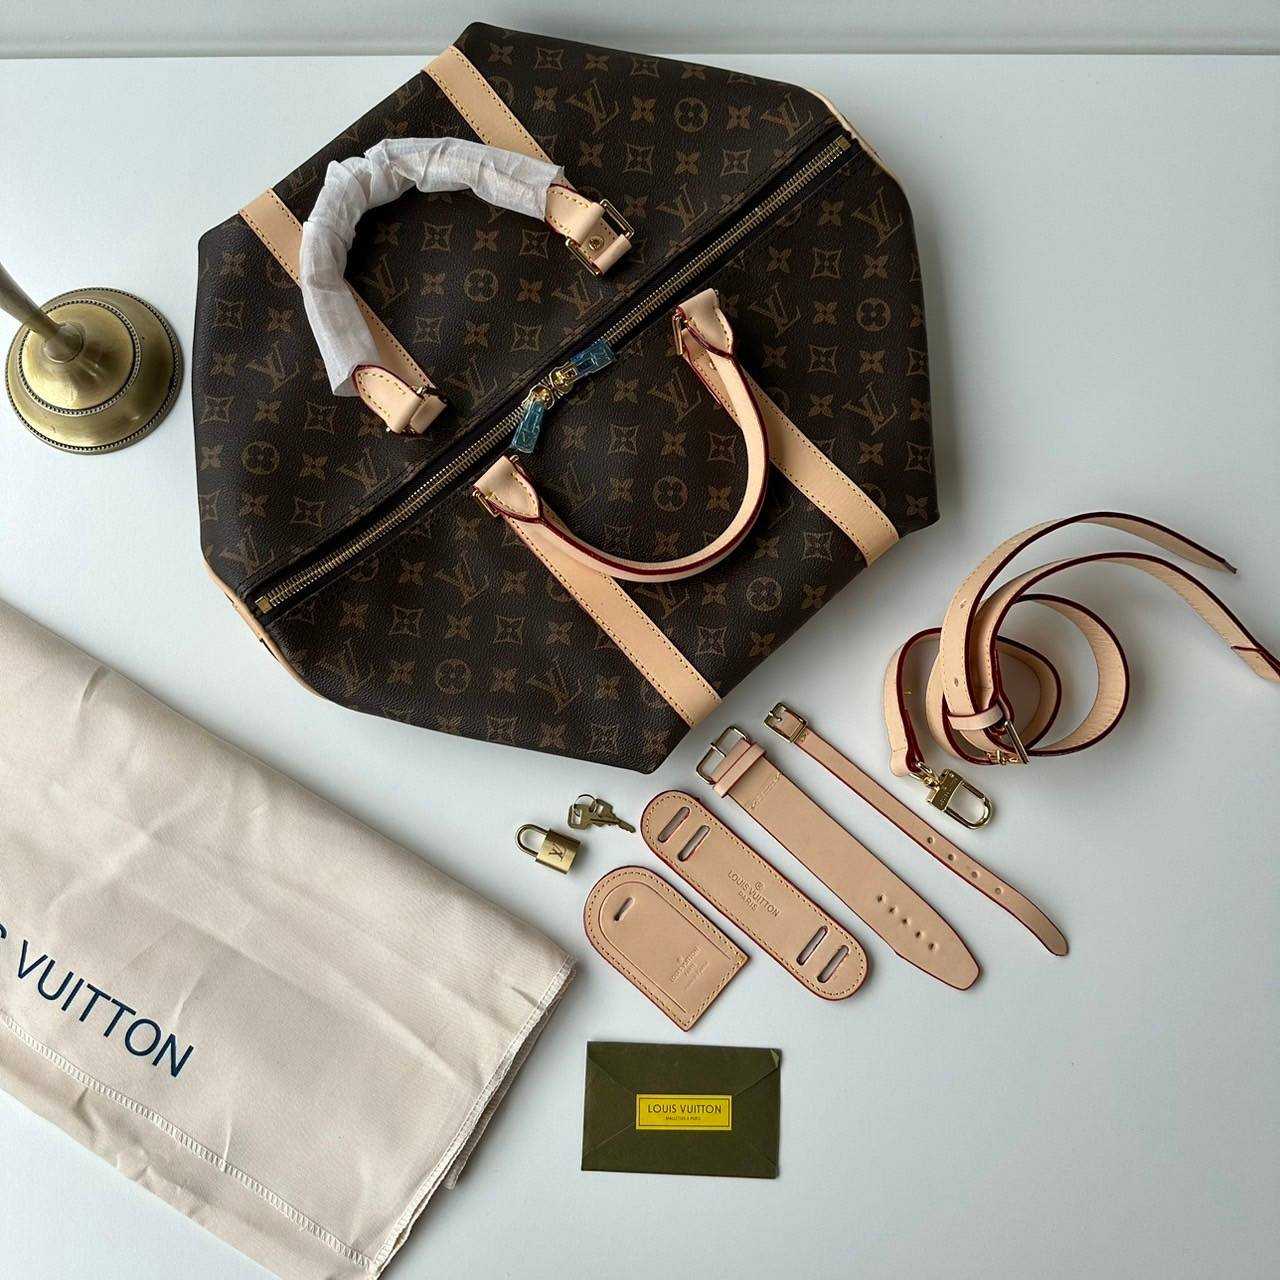 How many Louis Vuitton's do you think can fit in this #LV Keepall